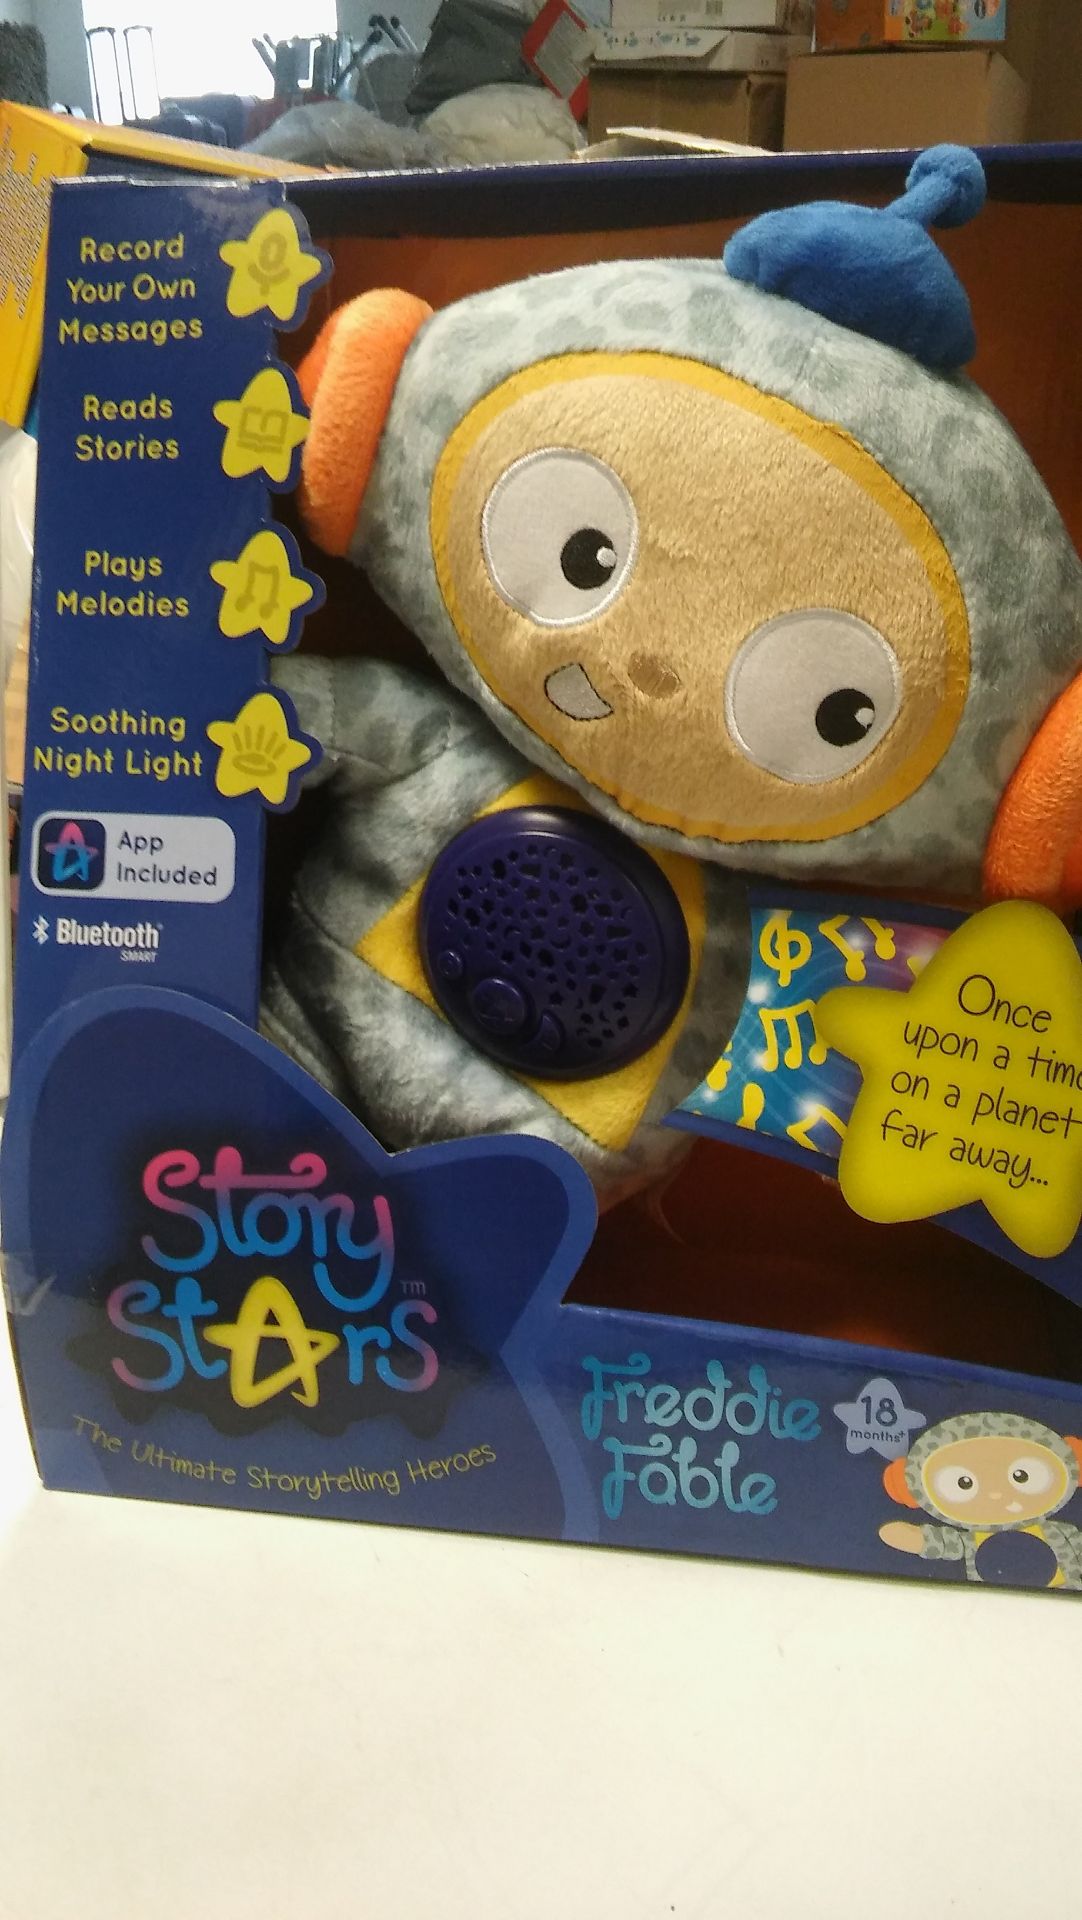 Story Stars Freddie Fable night light, music and story player.Record your own messages, reads